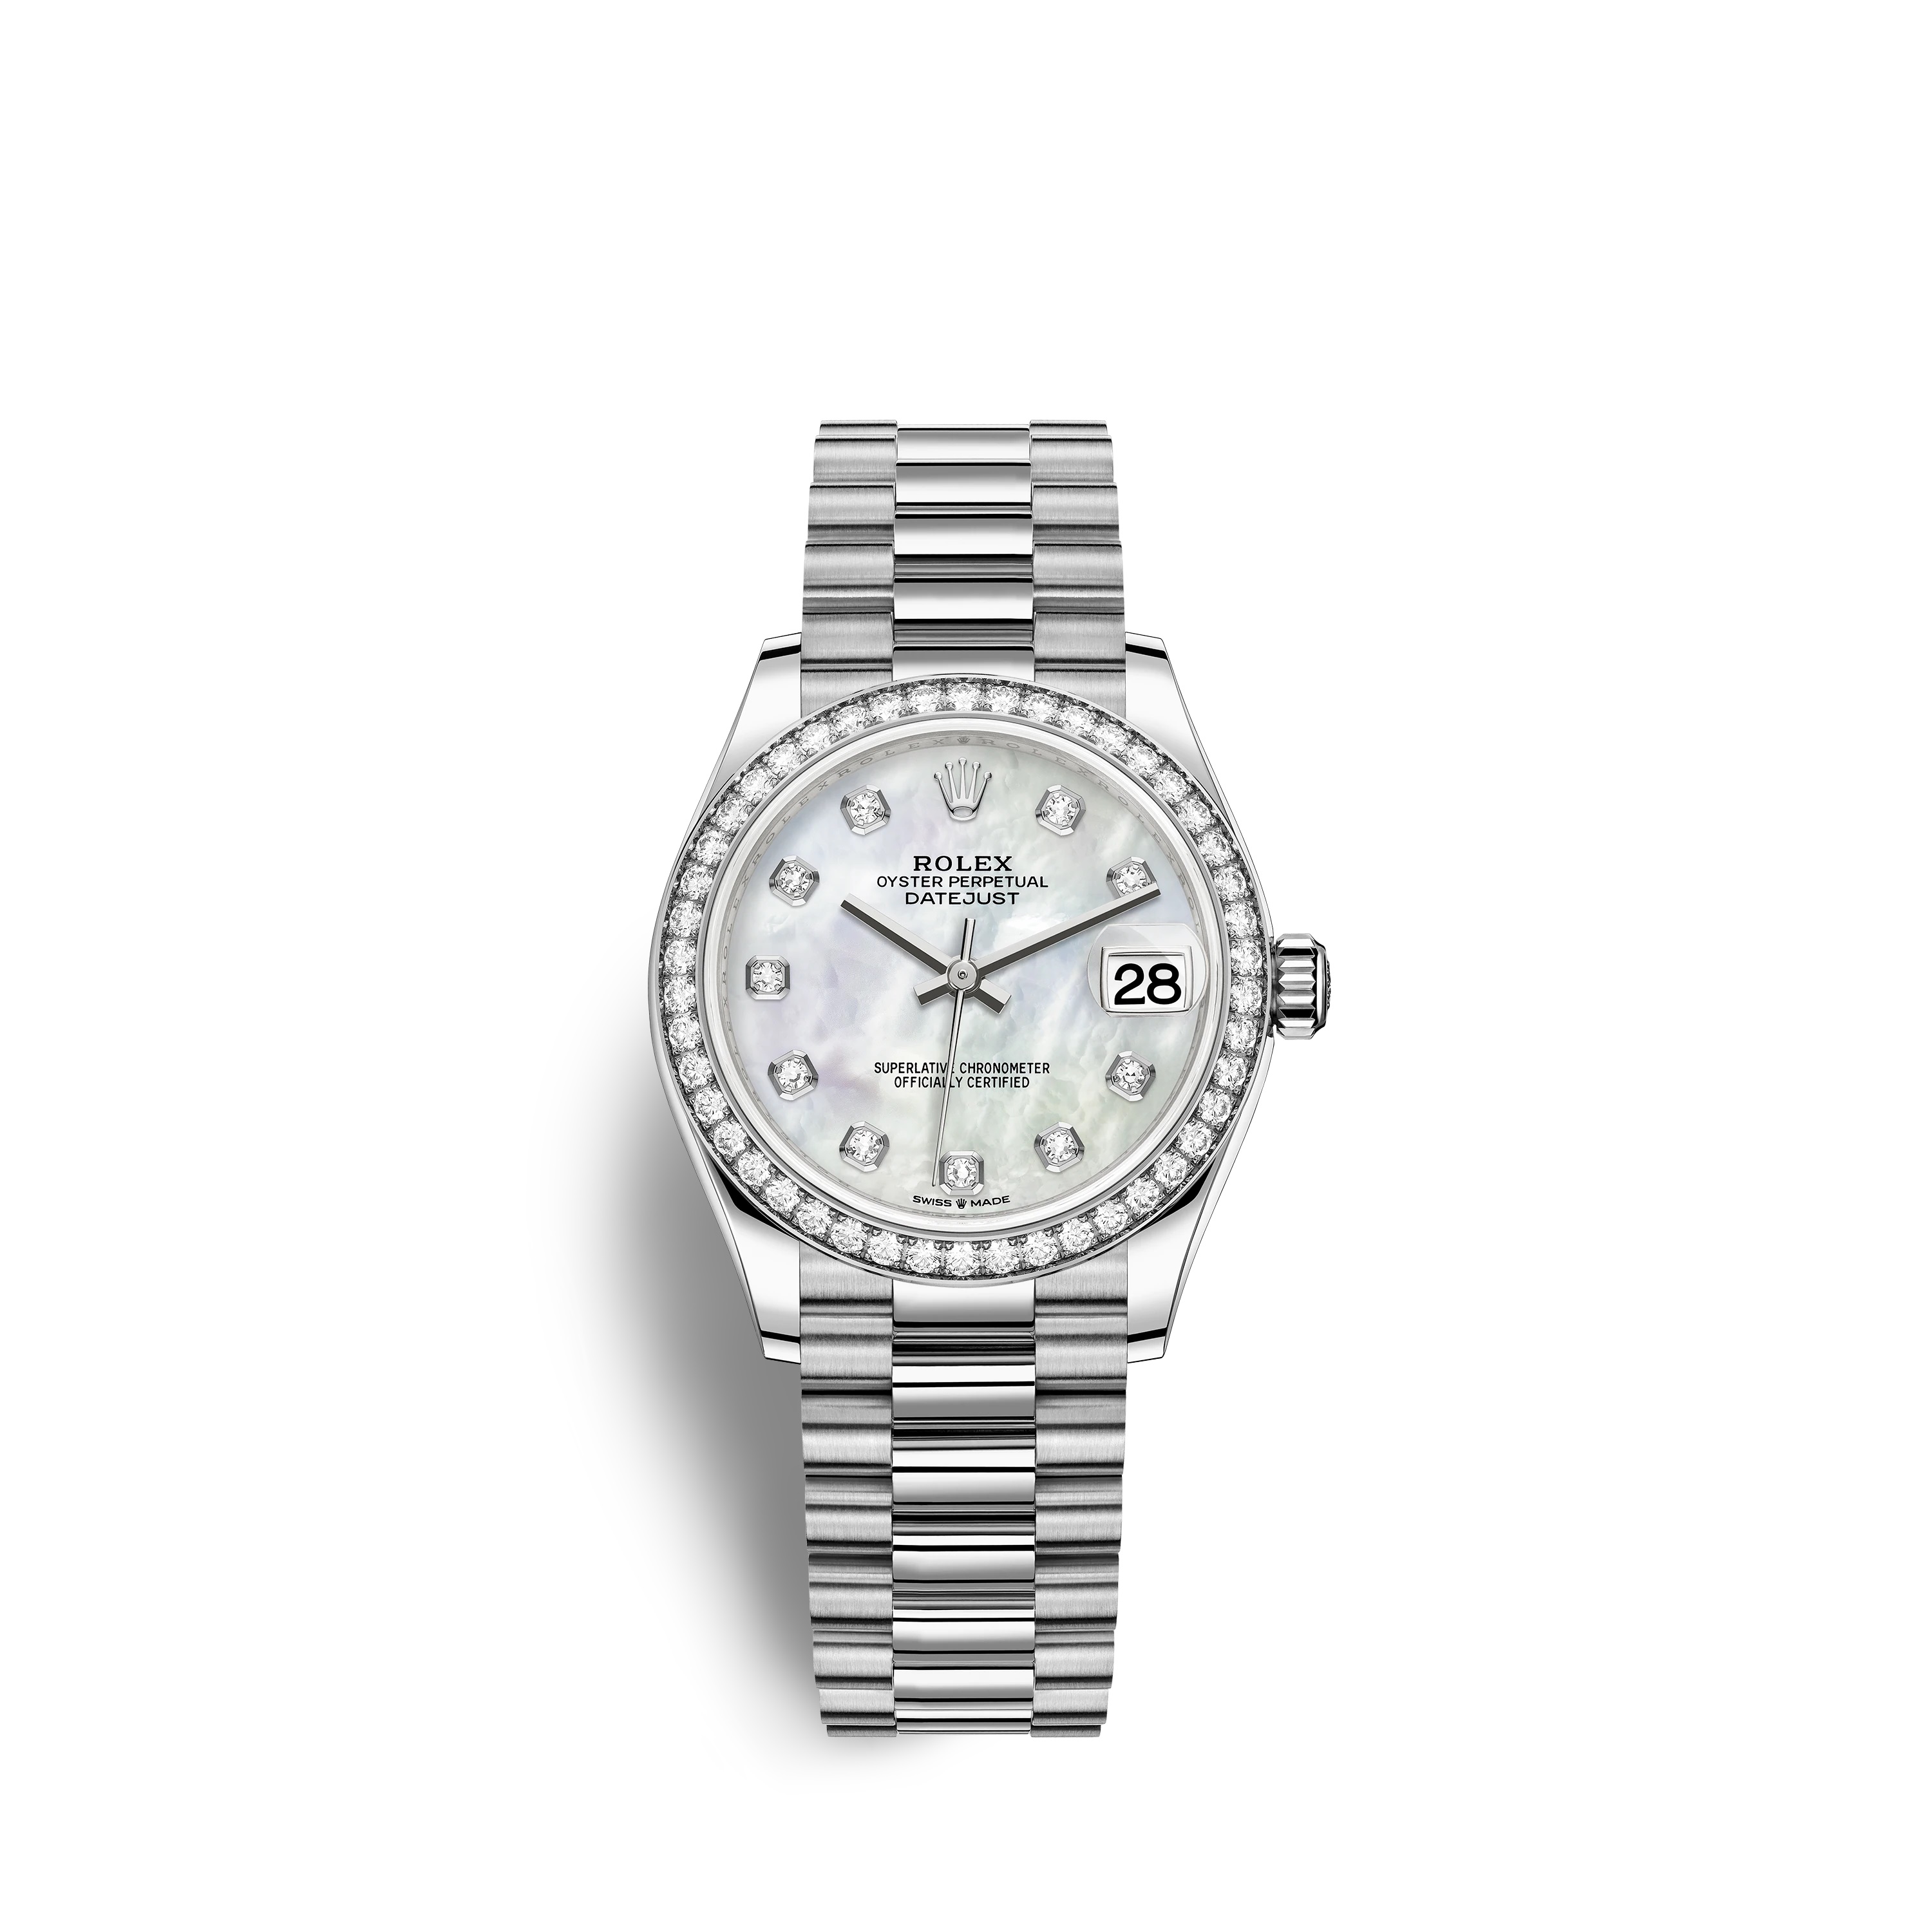 Datejust 31 278289RBR White Gold Watch (White Mother-of-Pearl Set with Diamonds)